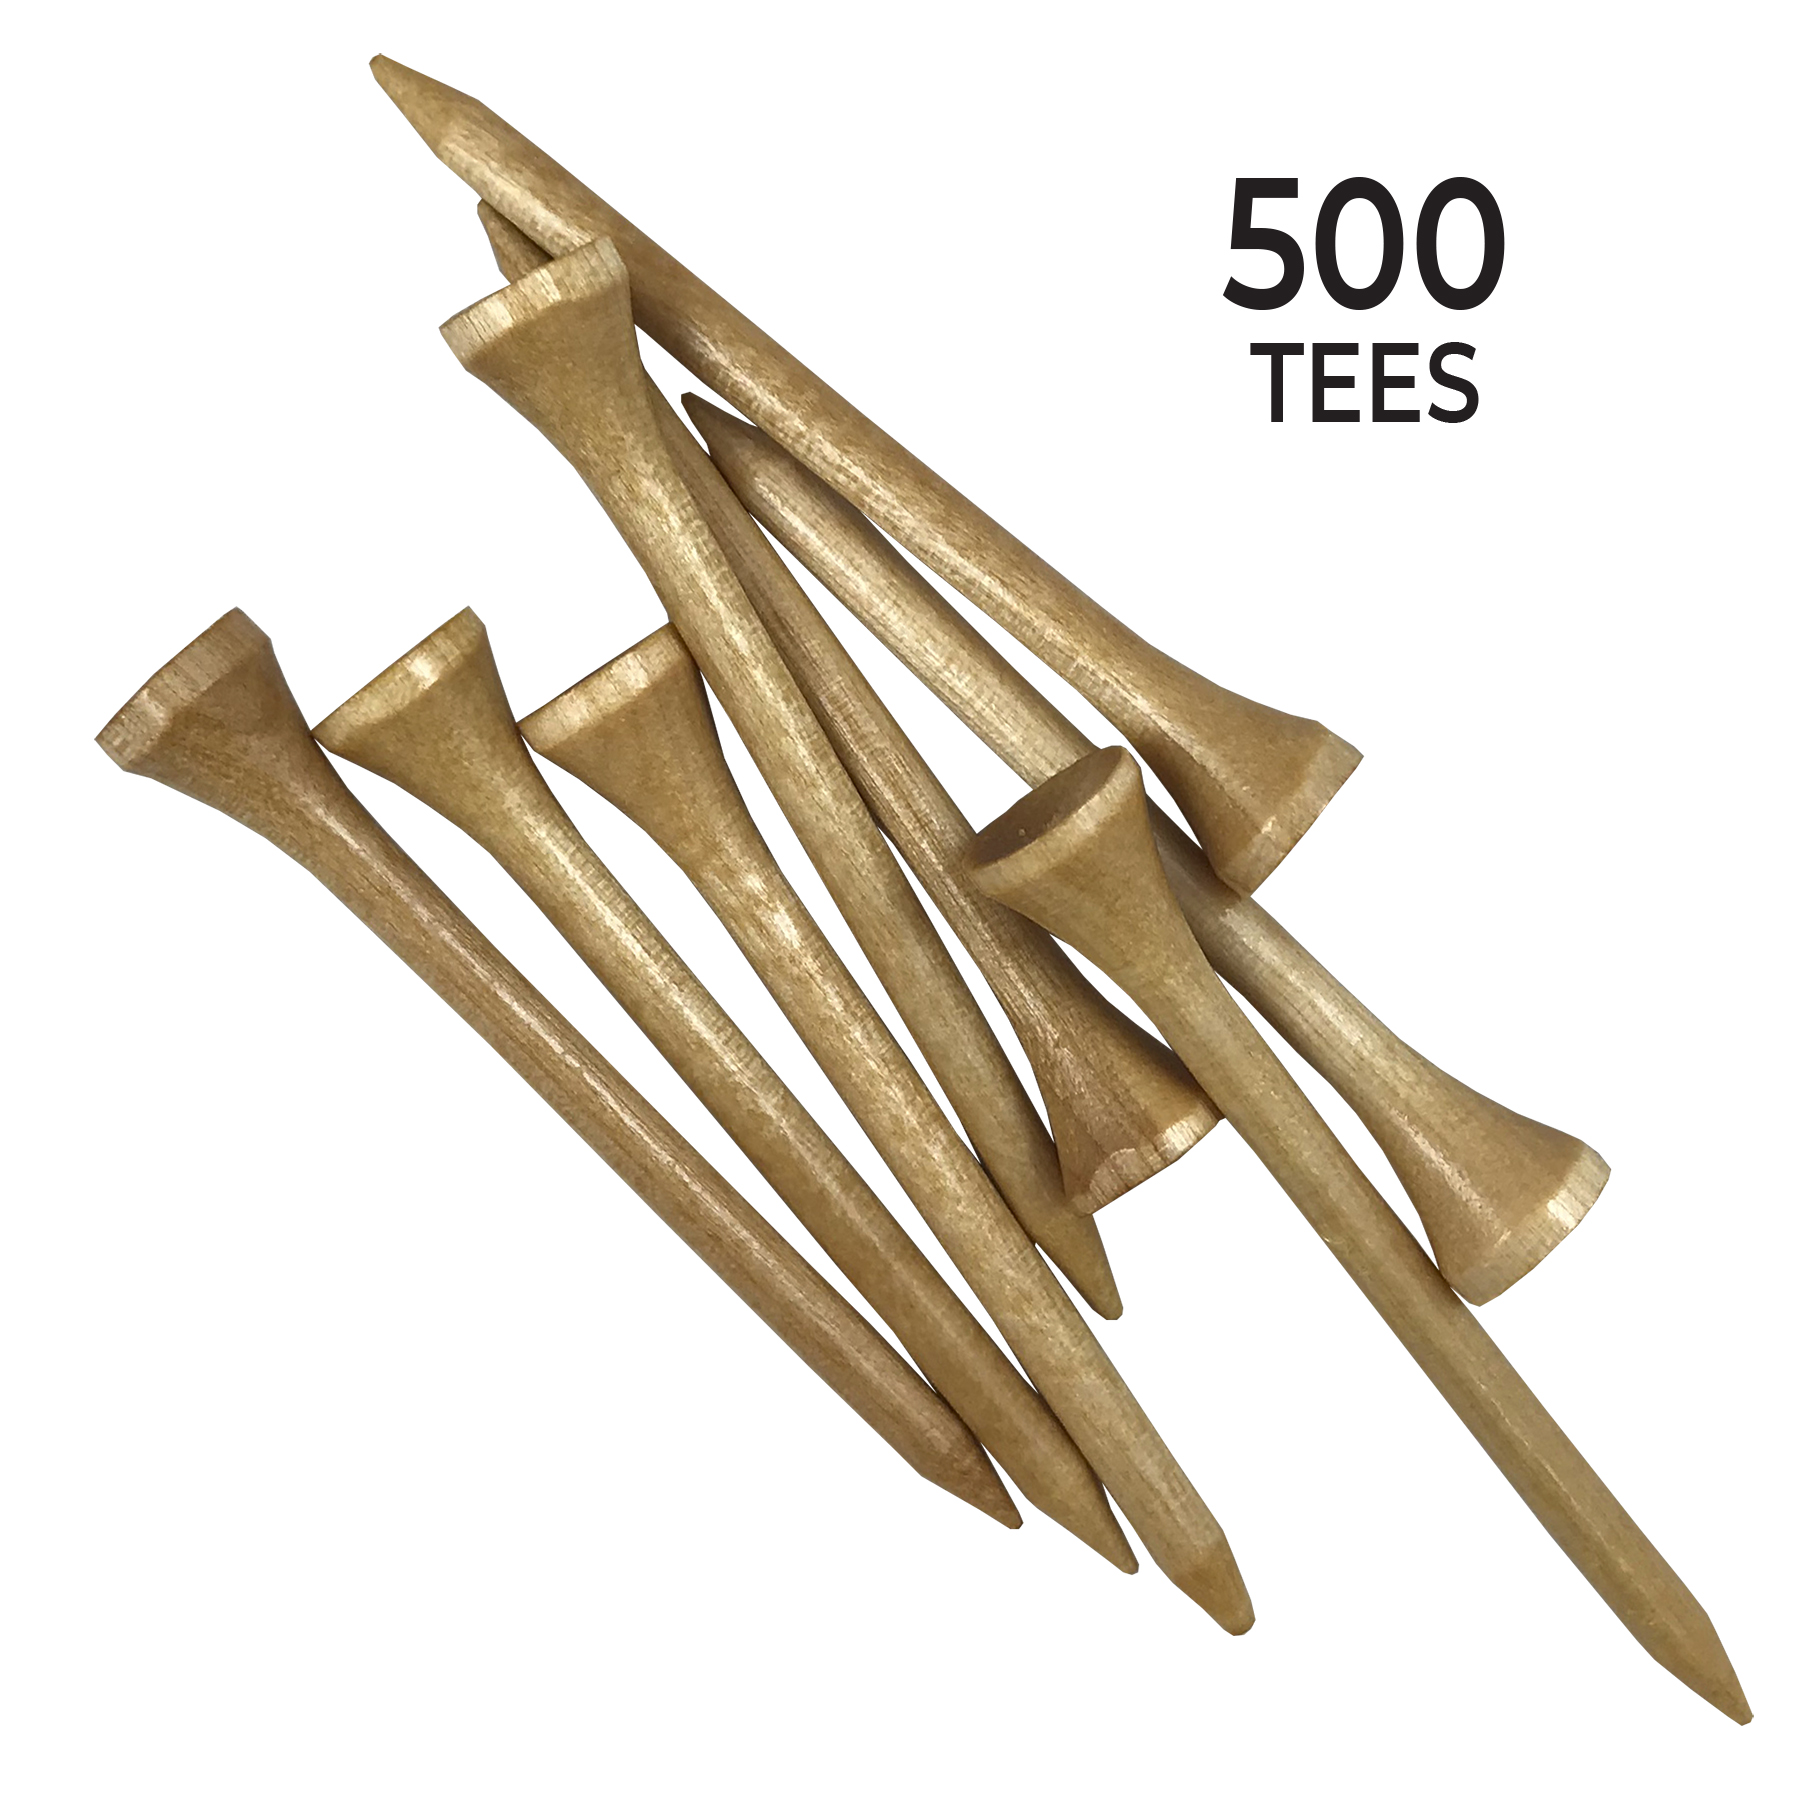 Pride Wood Golf Tee, 2.75 inch, Natural, 500 Count - image 3 of 8